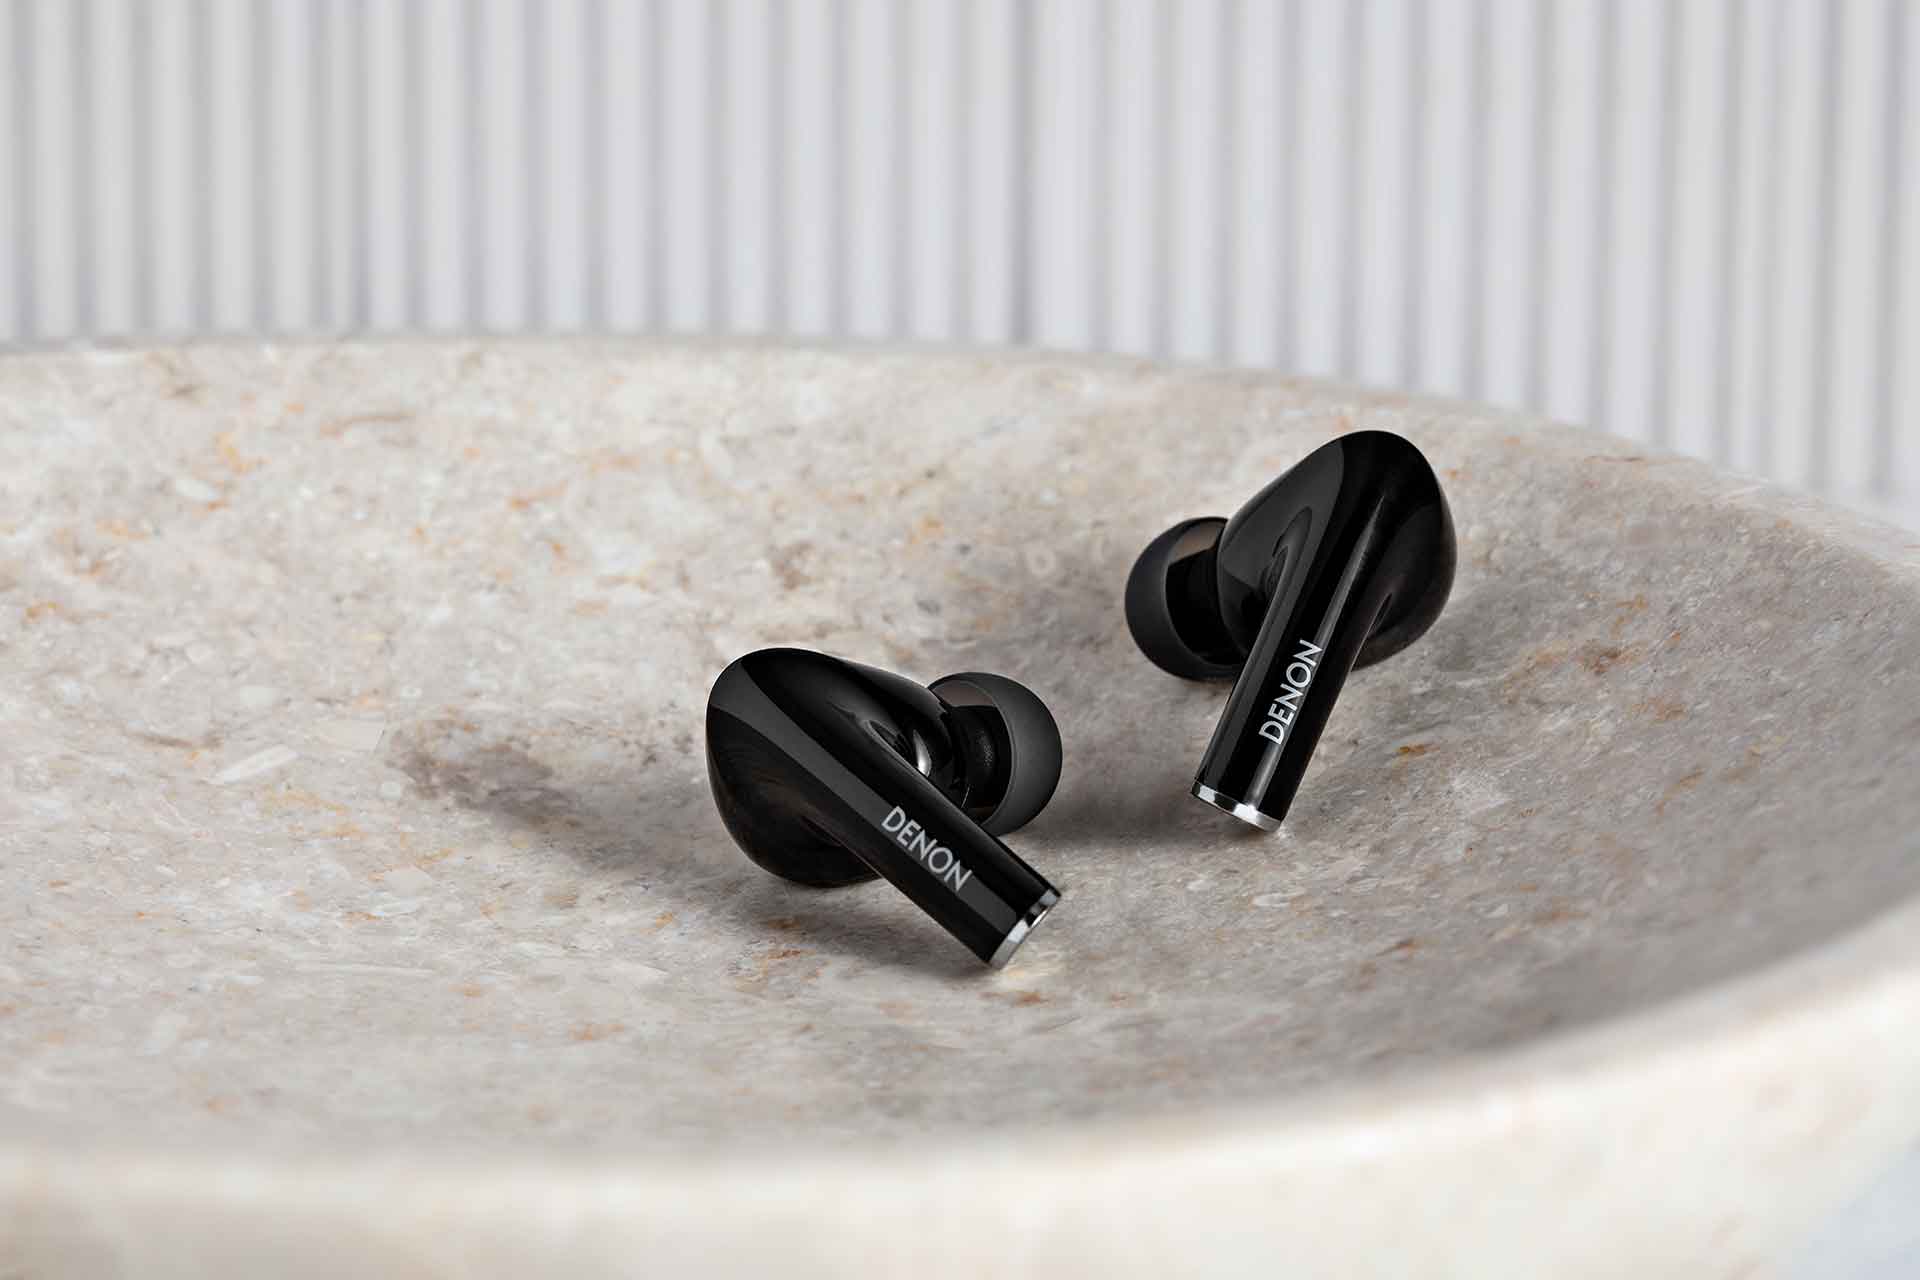 Denon Noise Cancelling Earbuds - True Wireless In-Ear Headphones with  active noise cancelling